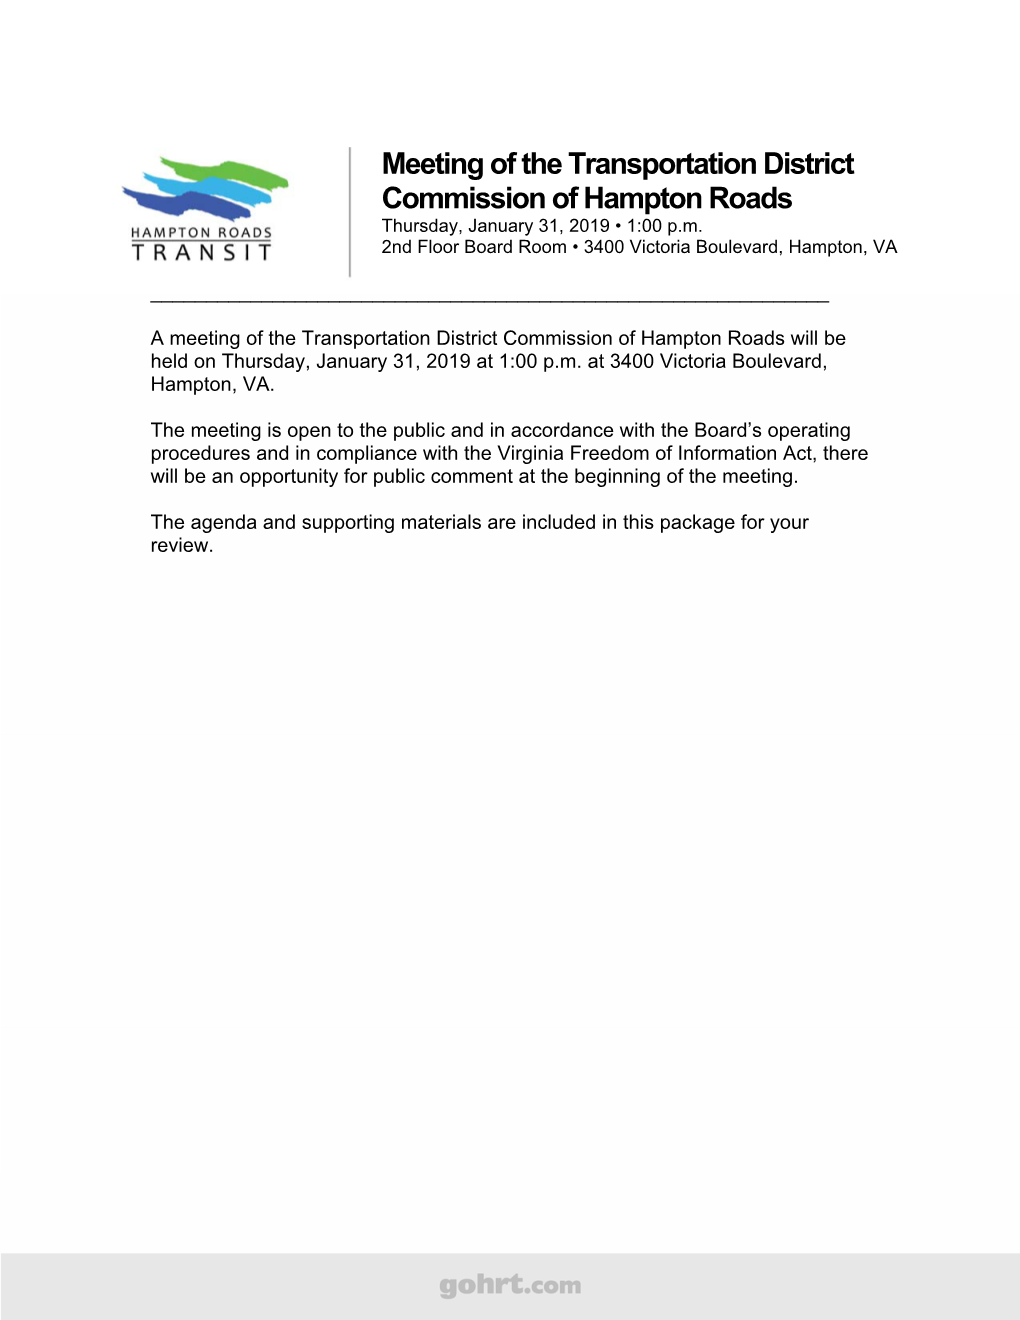 Meeting of the Transportation District Commission of Hampton Roads Thursday, January 31, 2019 • 1:00 P.M